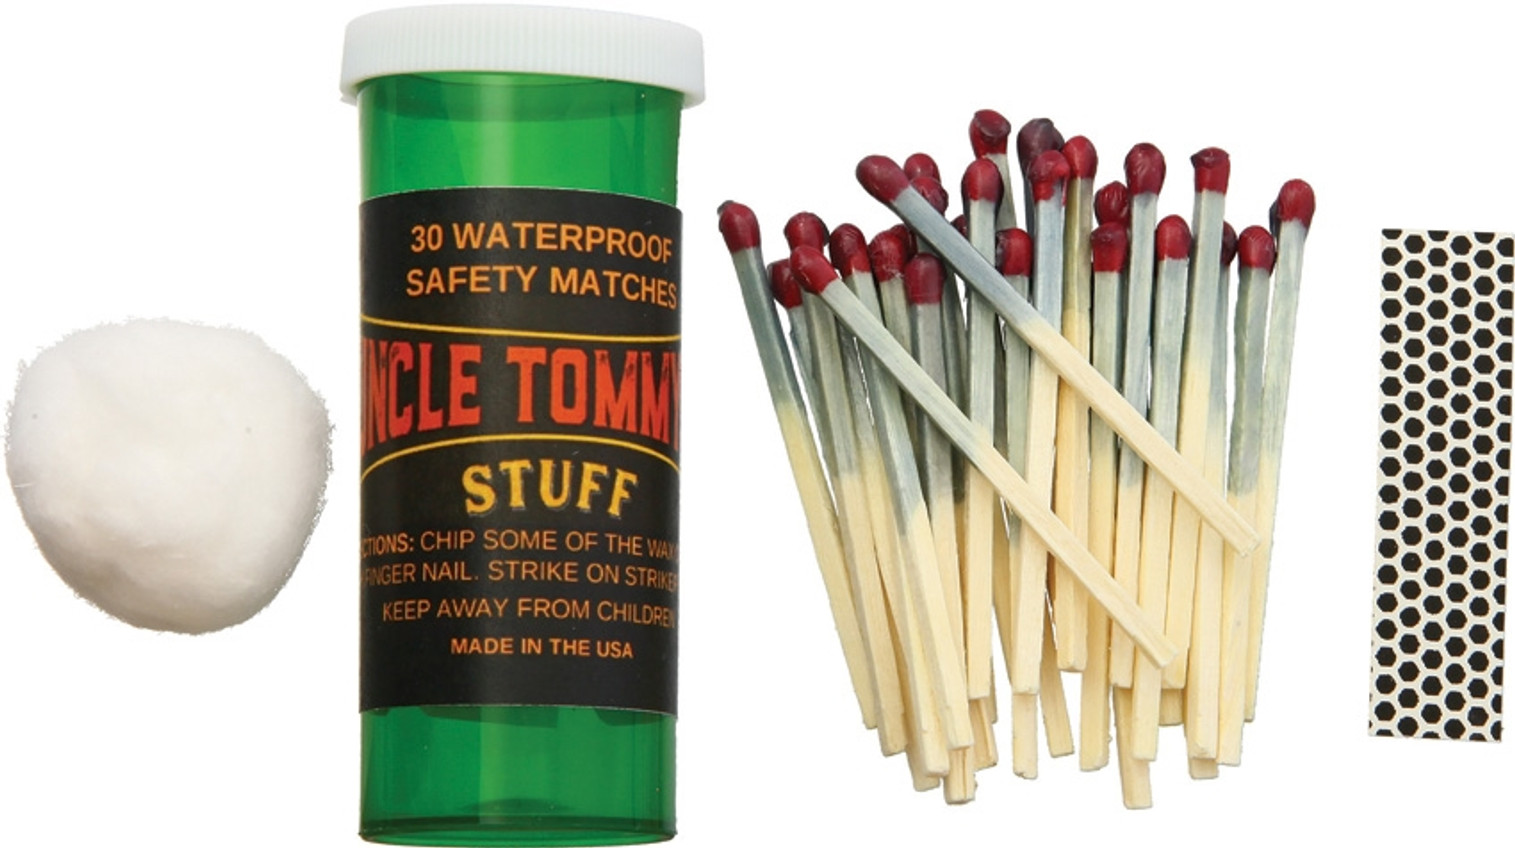  30 Waterproof Safety Matches